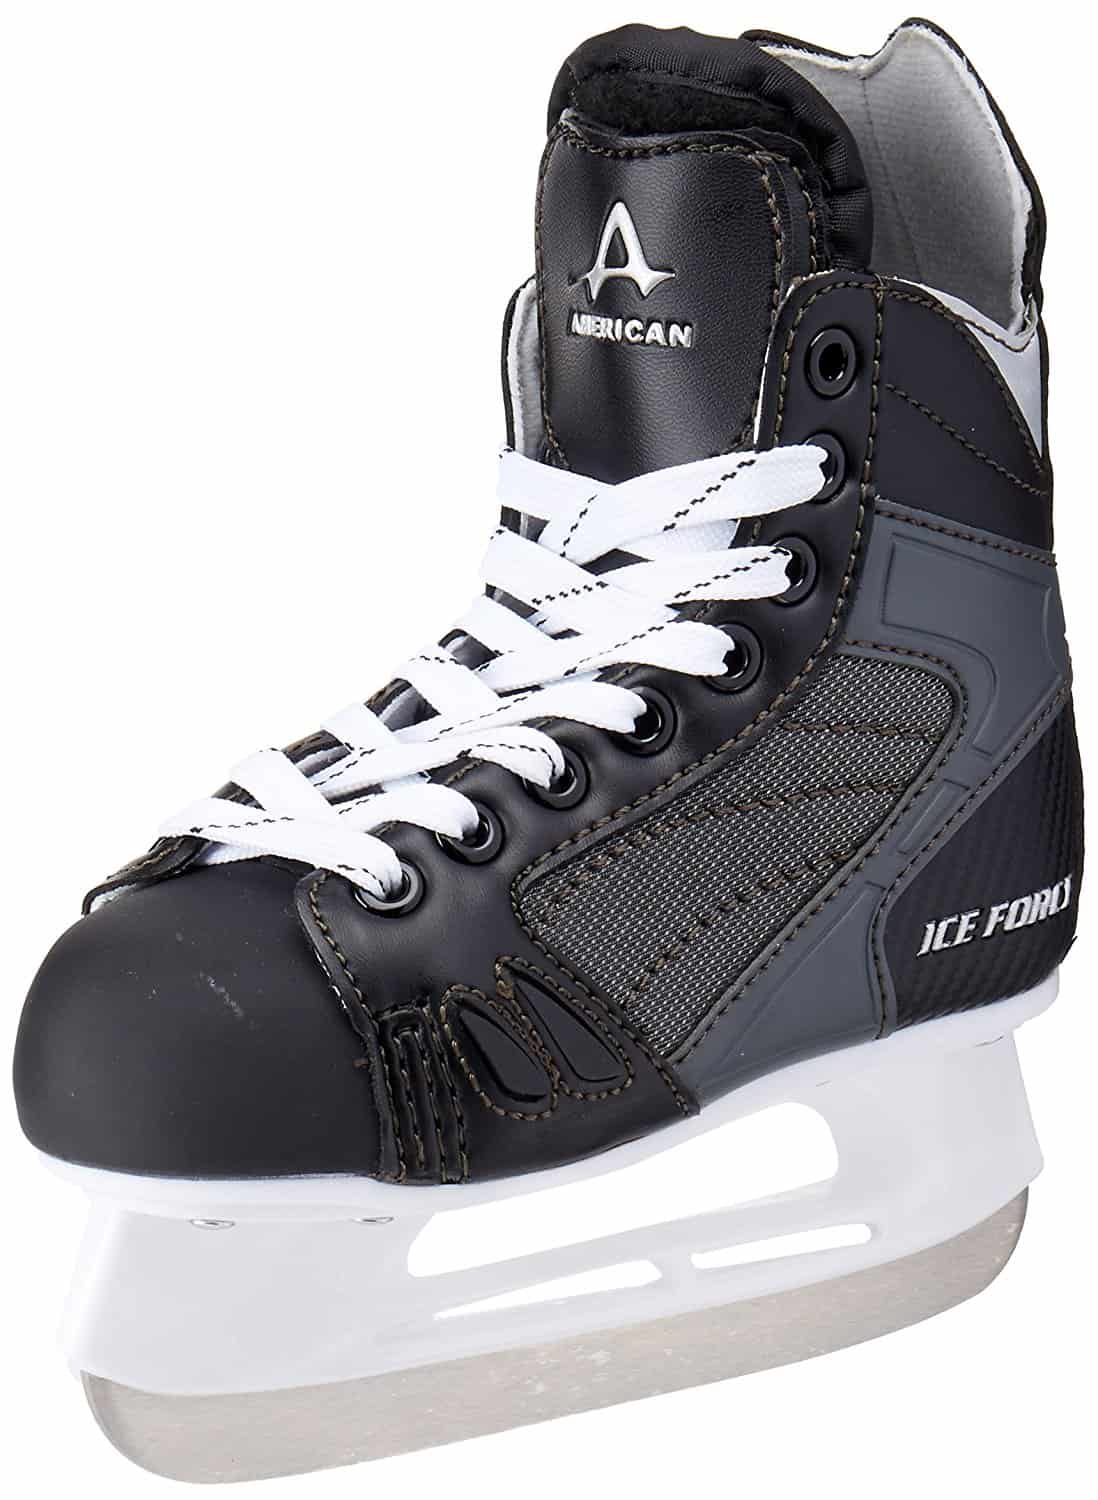  American Athletic Shoe Boy's Ice Force